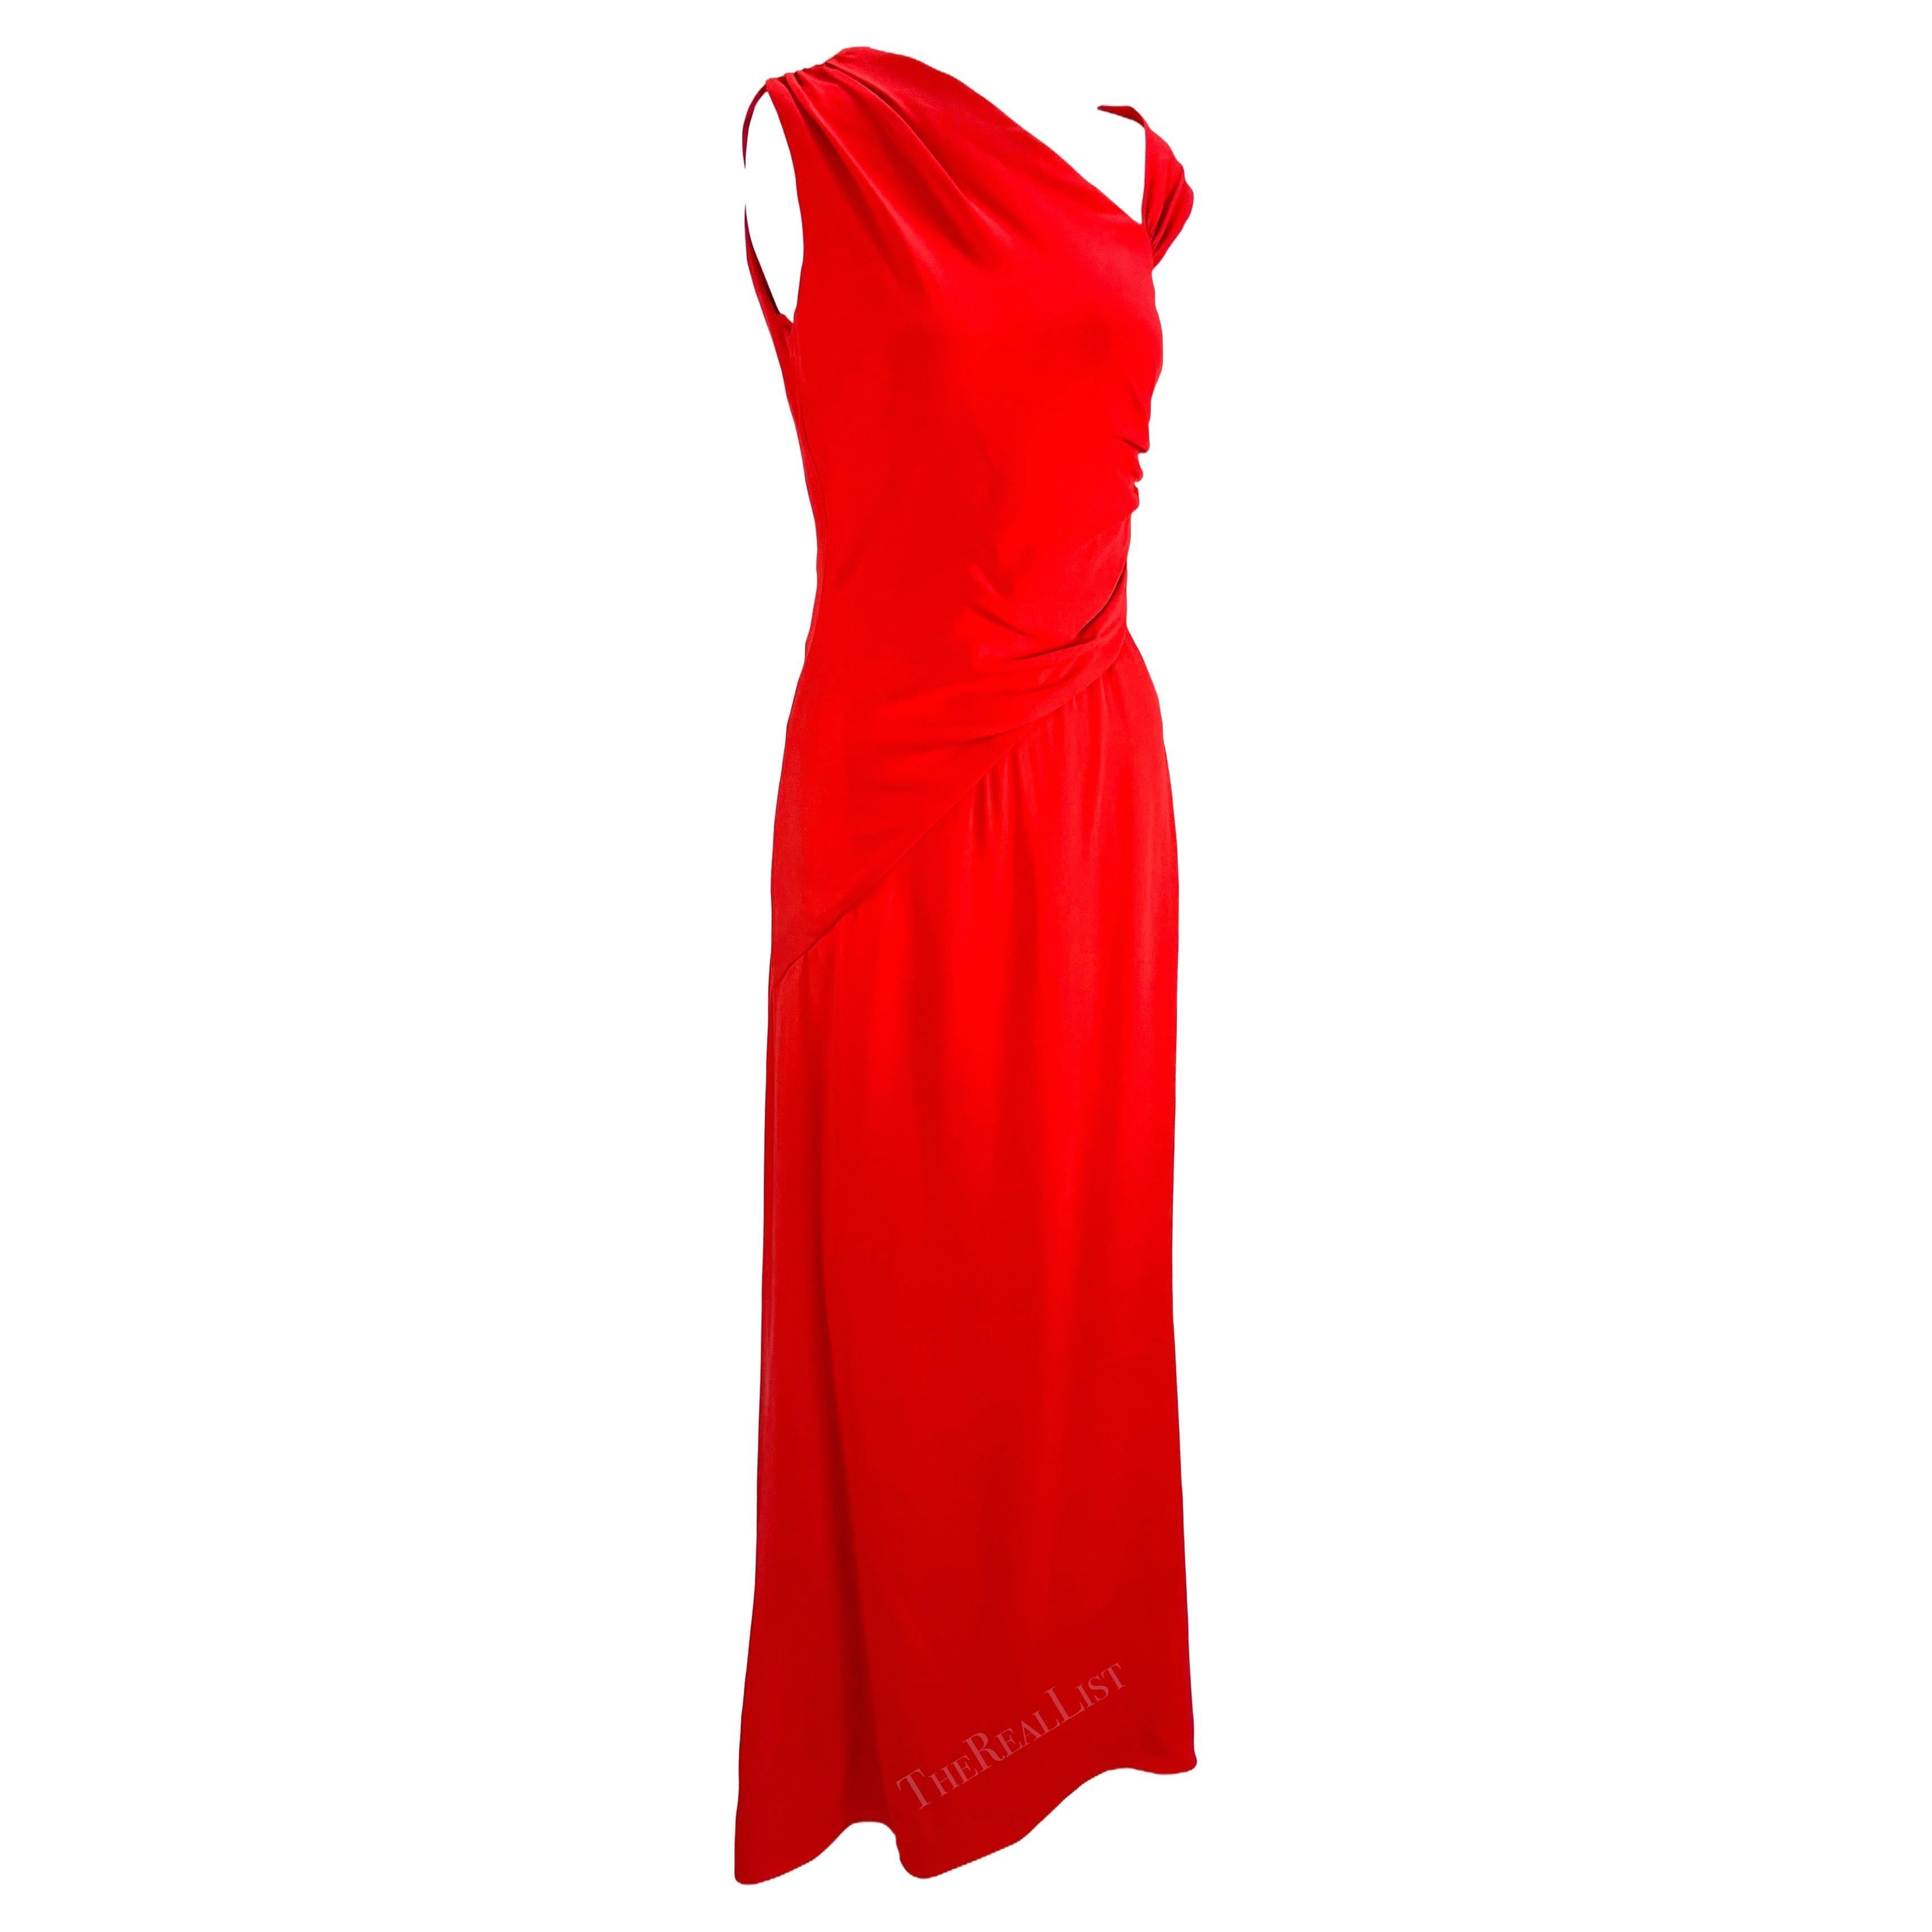 Presenting a gorgeous Valentino gown designed by Valentino Garavani before his retirement in his signature Valentino Red color. From the 2000s, this ankle-length gown features an asymmetric v-neckline and a single off-the-shoulder strap. The dress